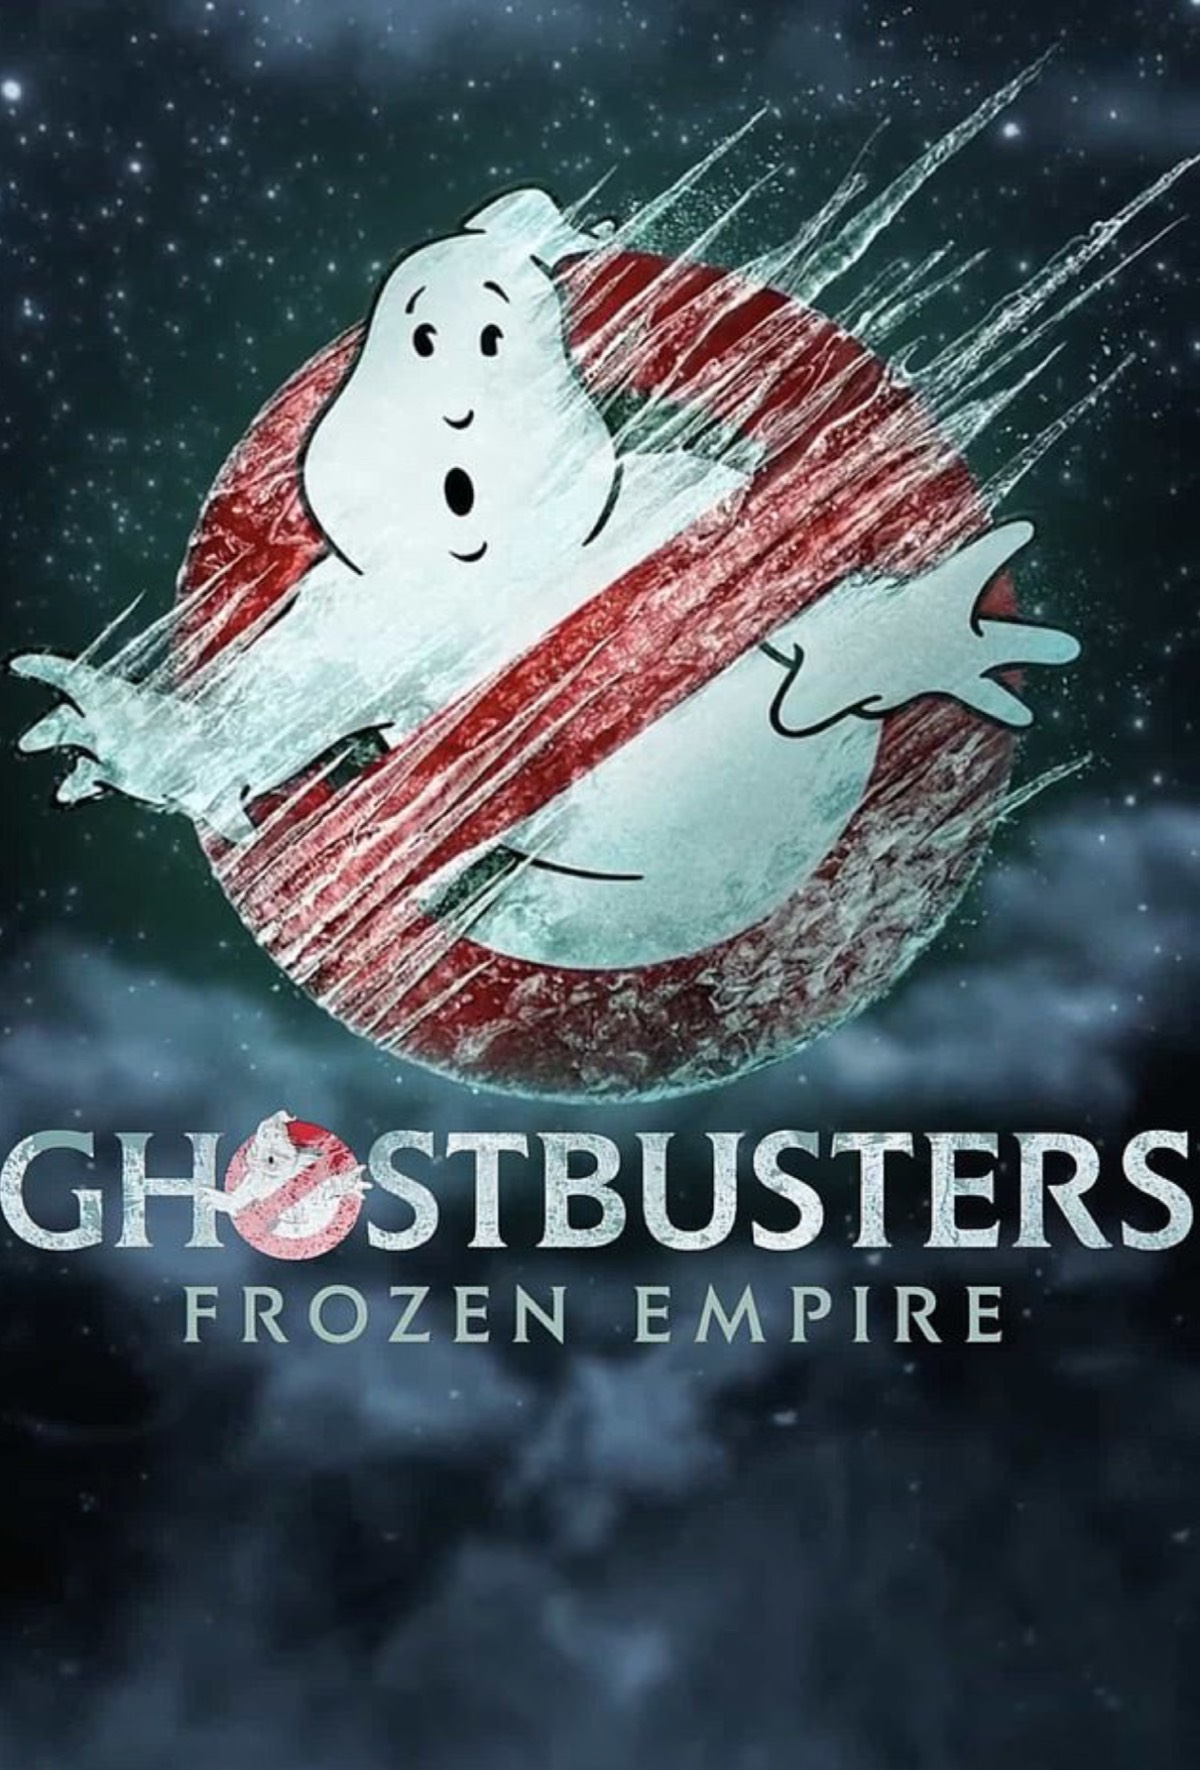 New York falls under a spectral “death chill” in Ghostbusters Frozen